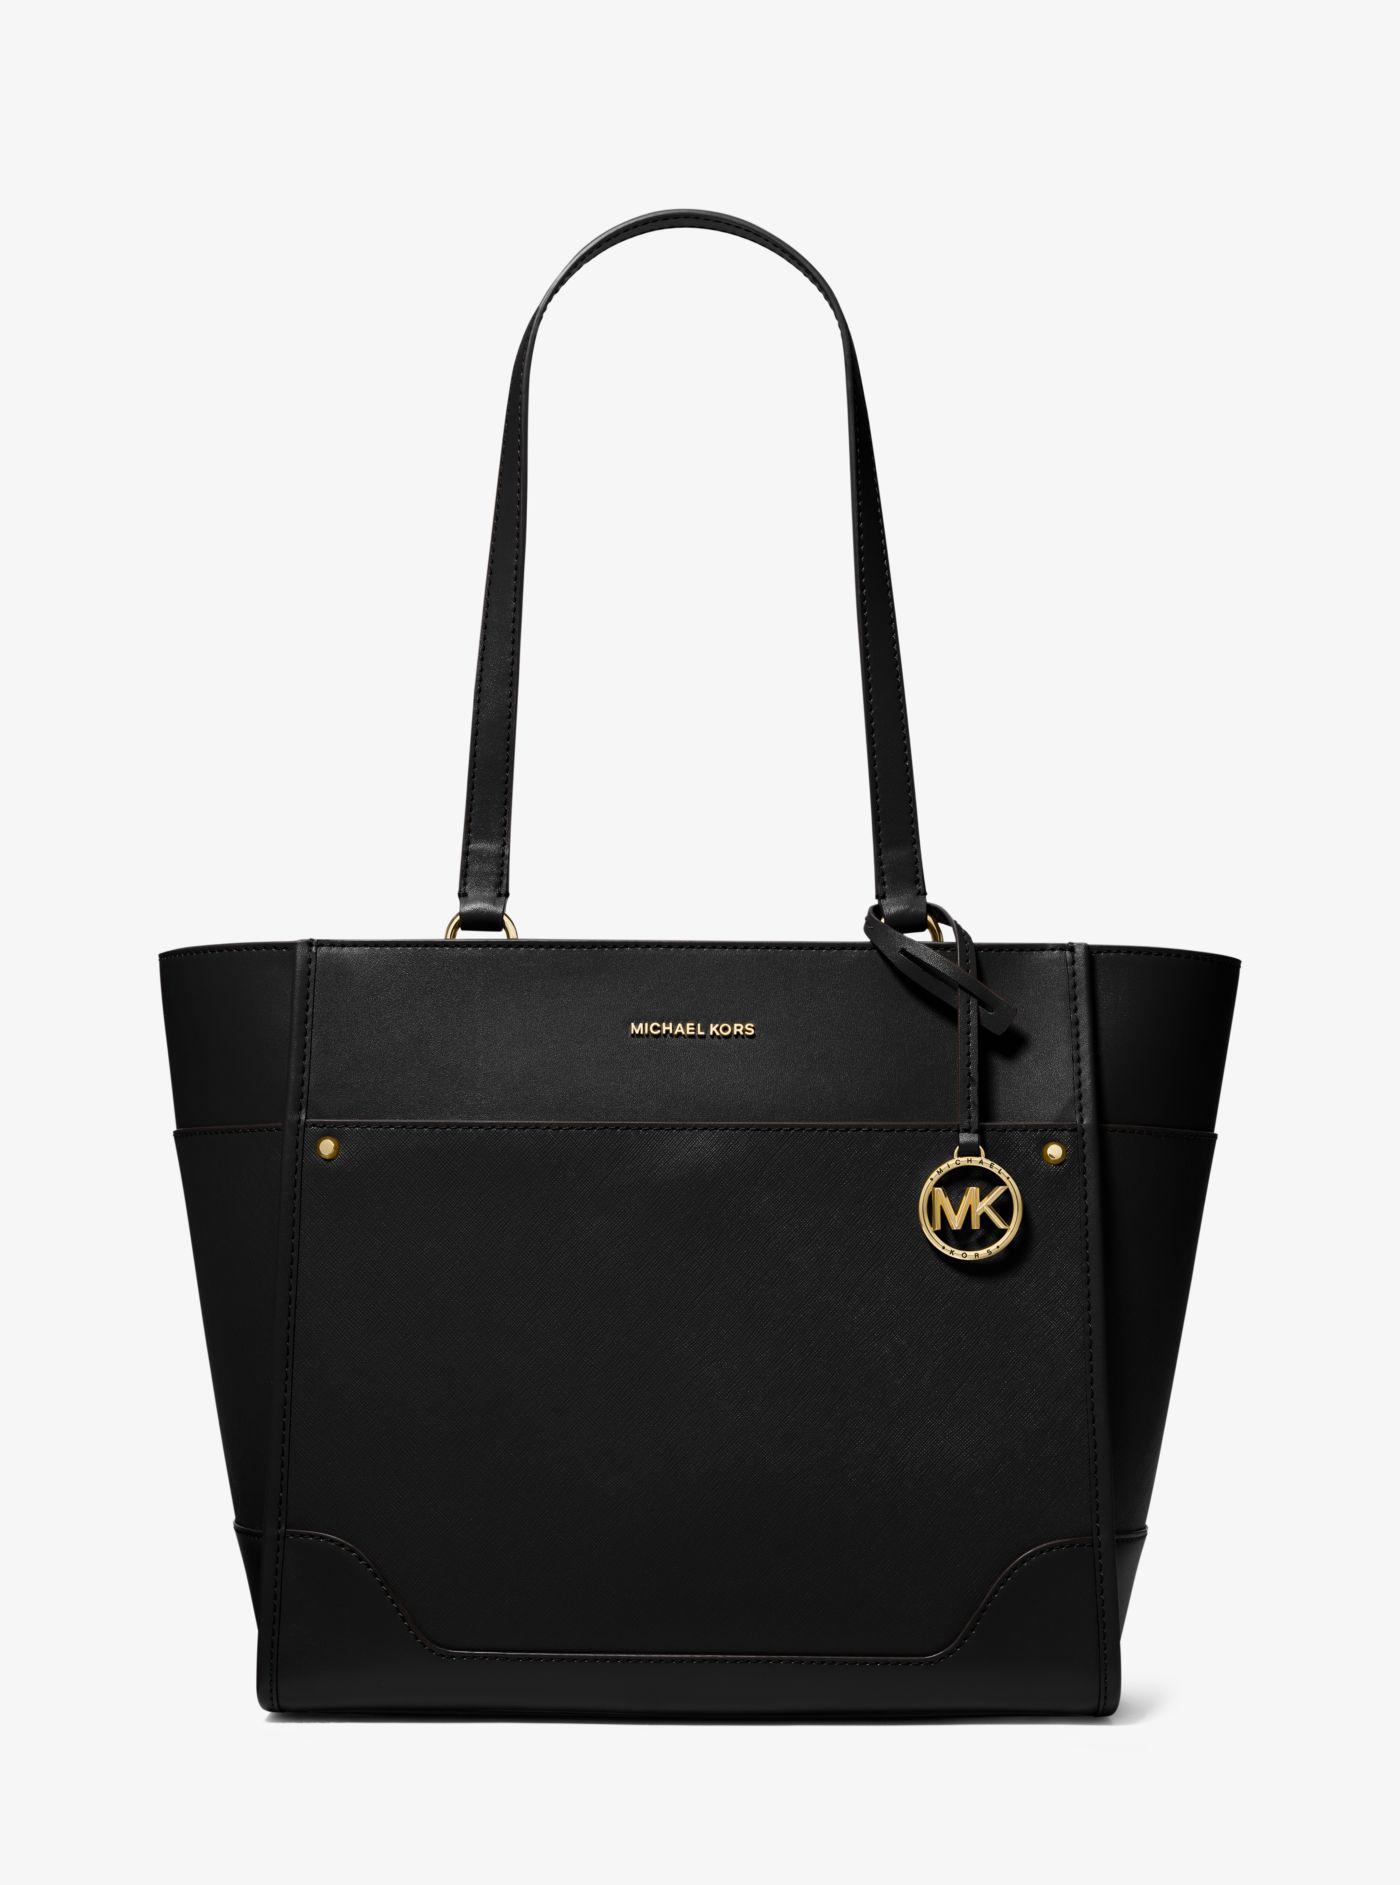 Michael Kors Harrison Large Leather Tote Bag in Black | Lyst